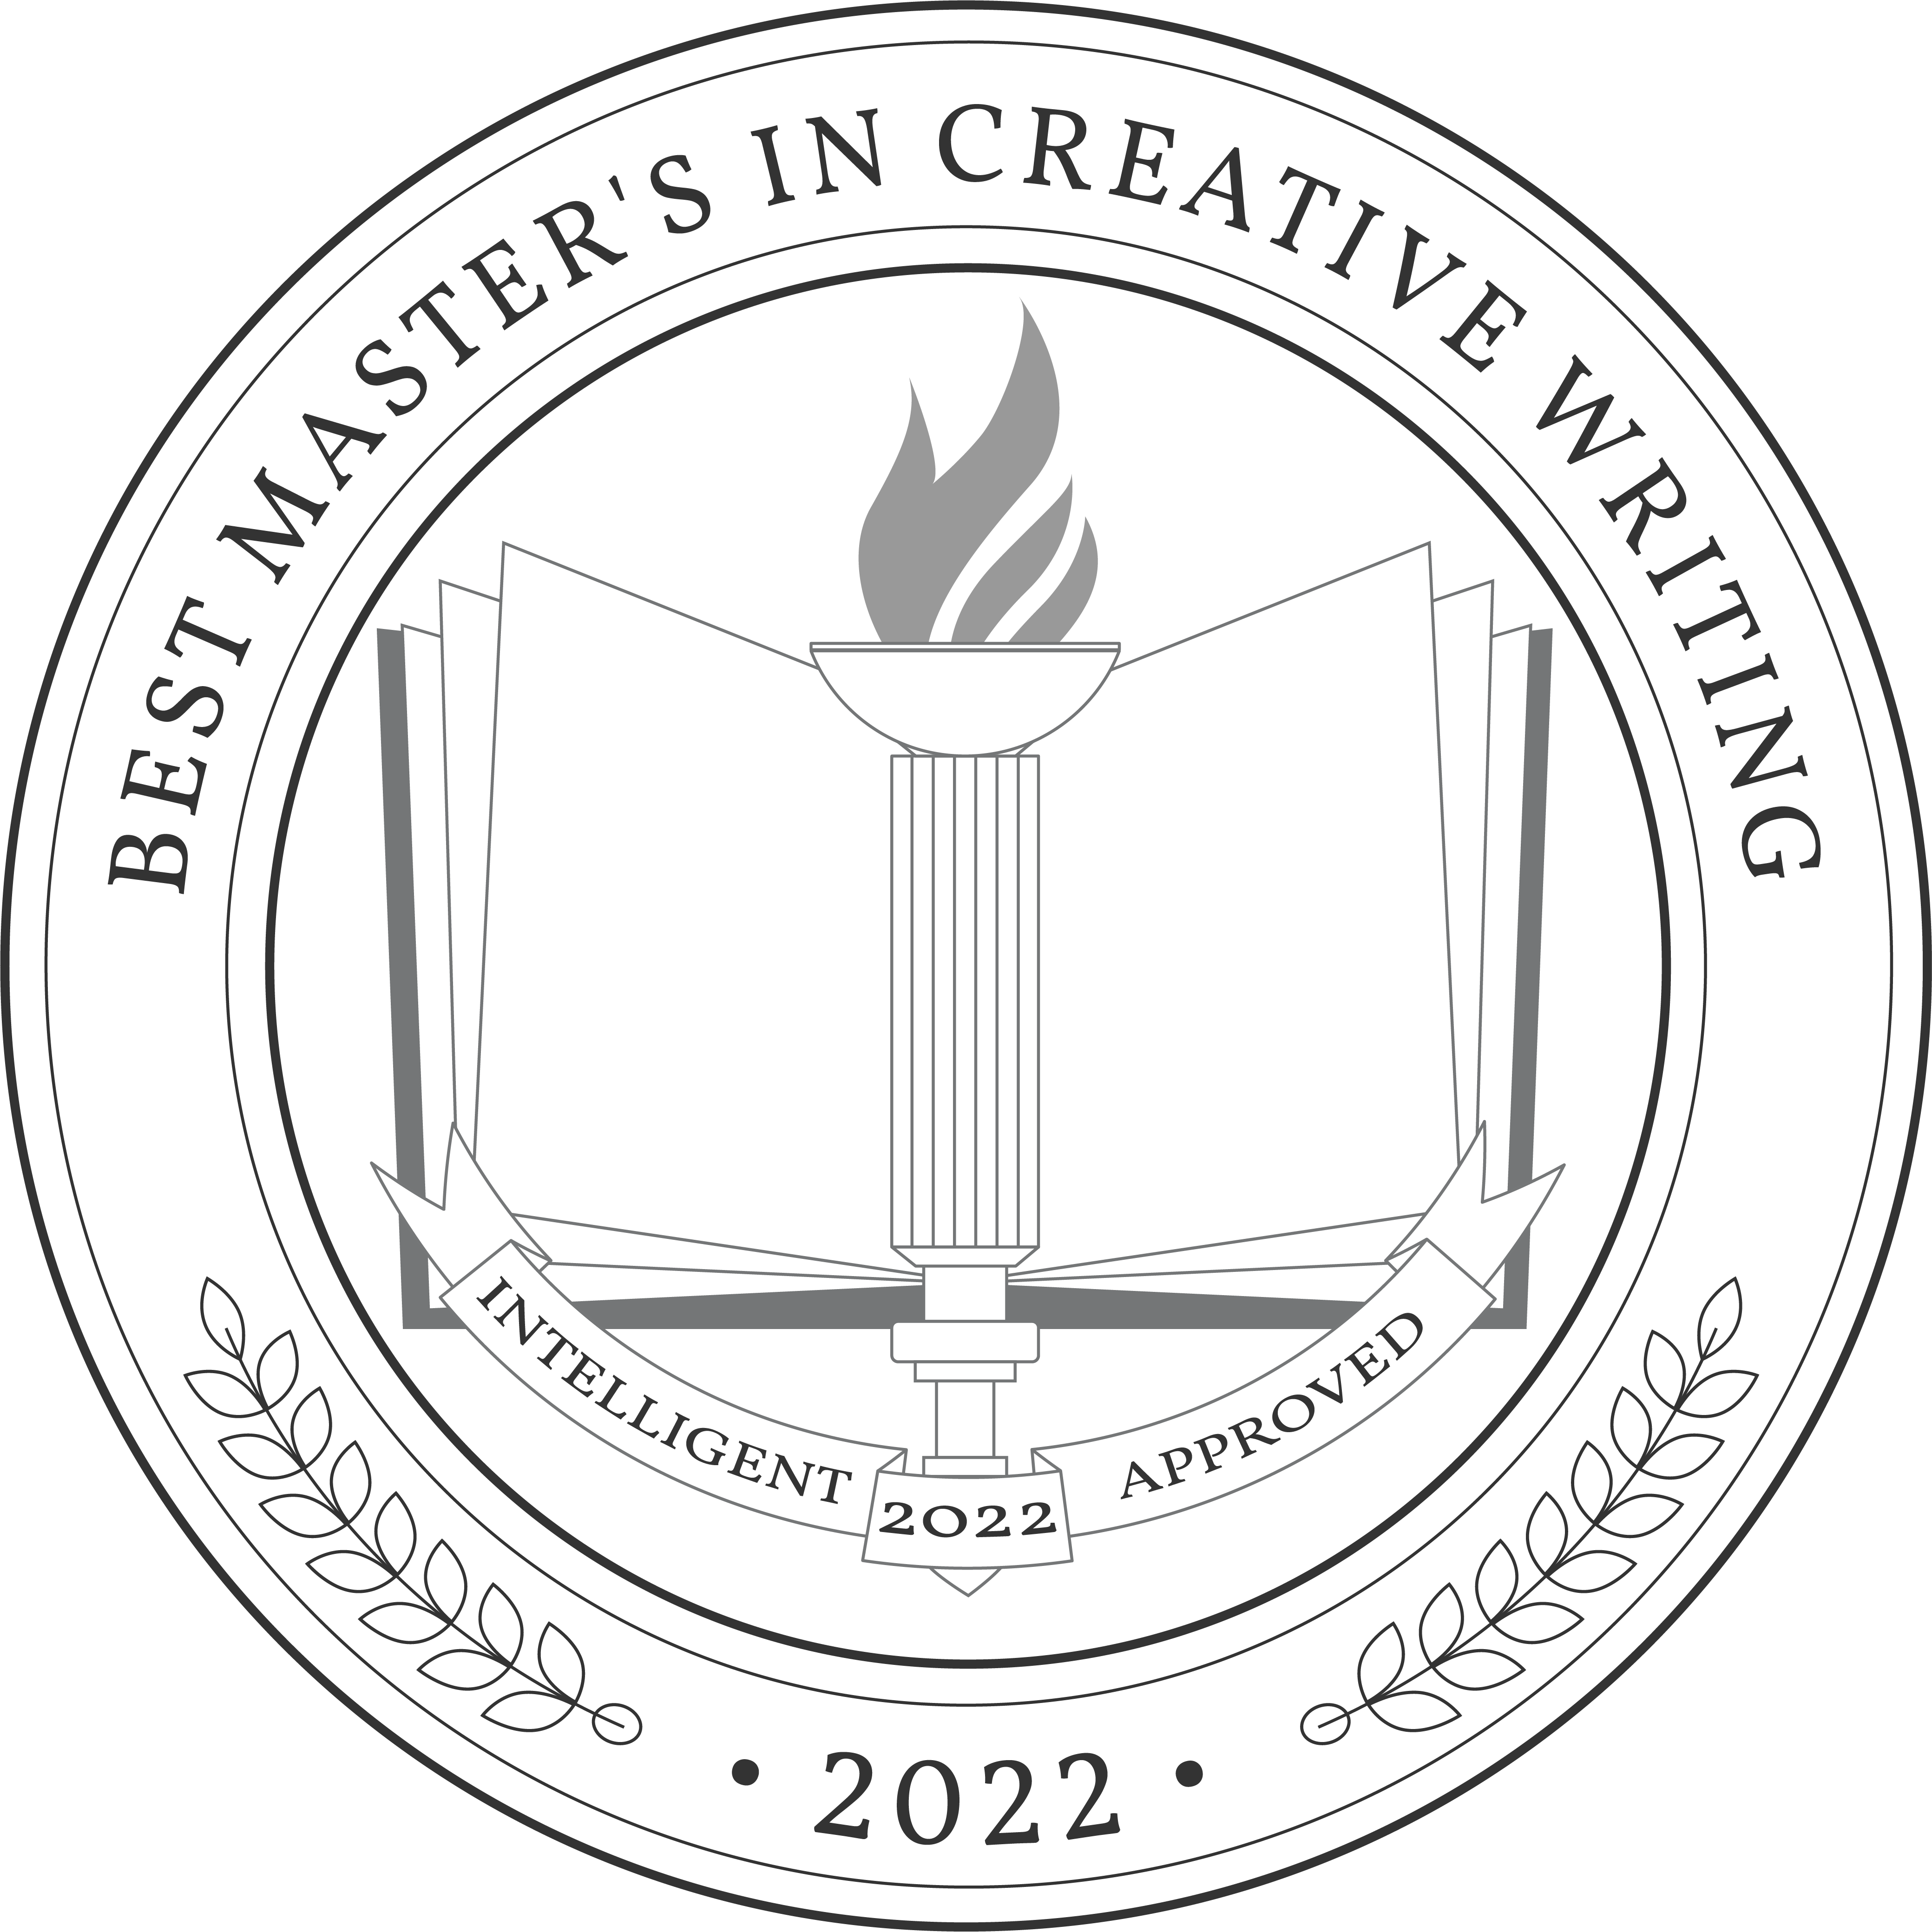 Best Online Master's in Creative Writing Degree Programs